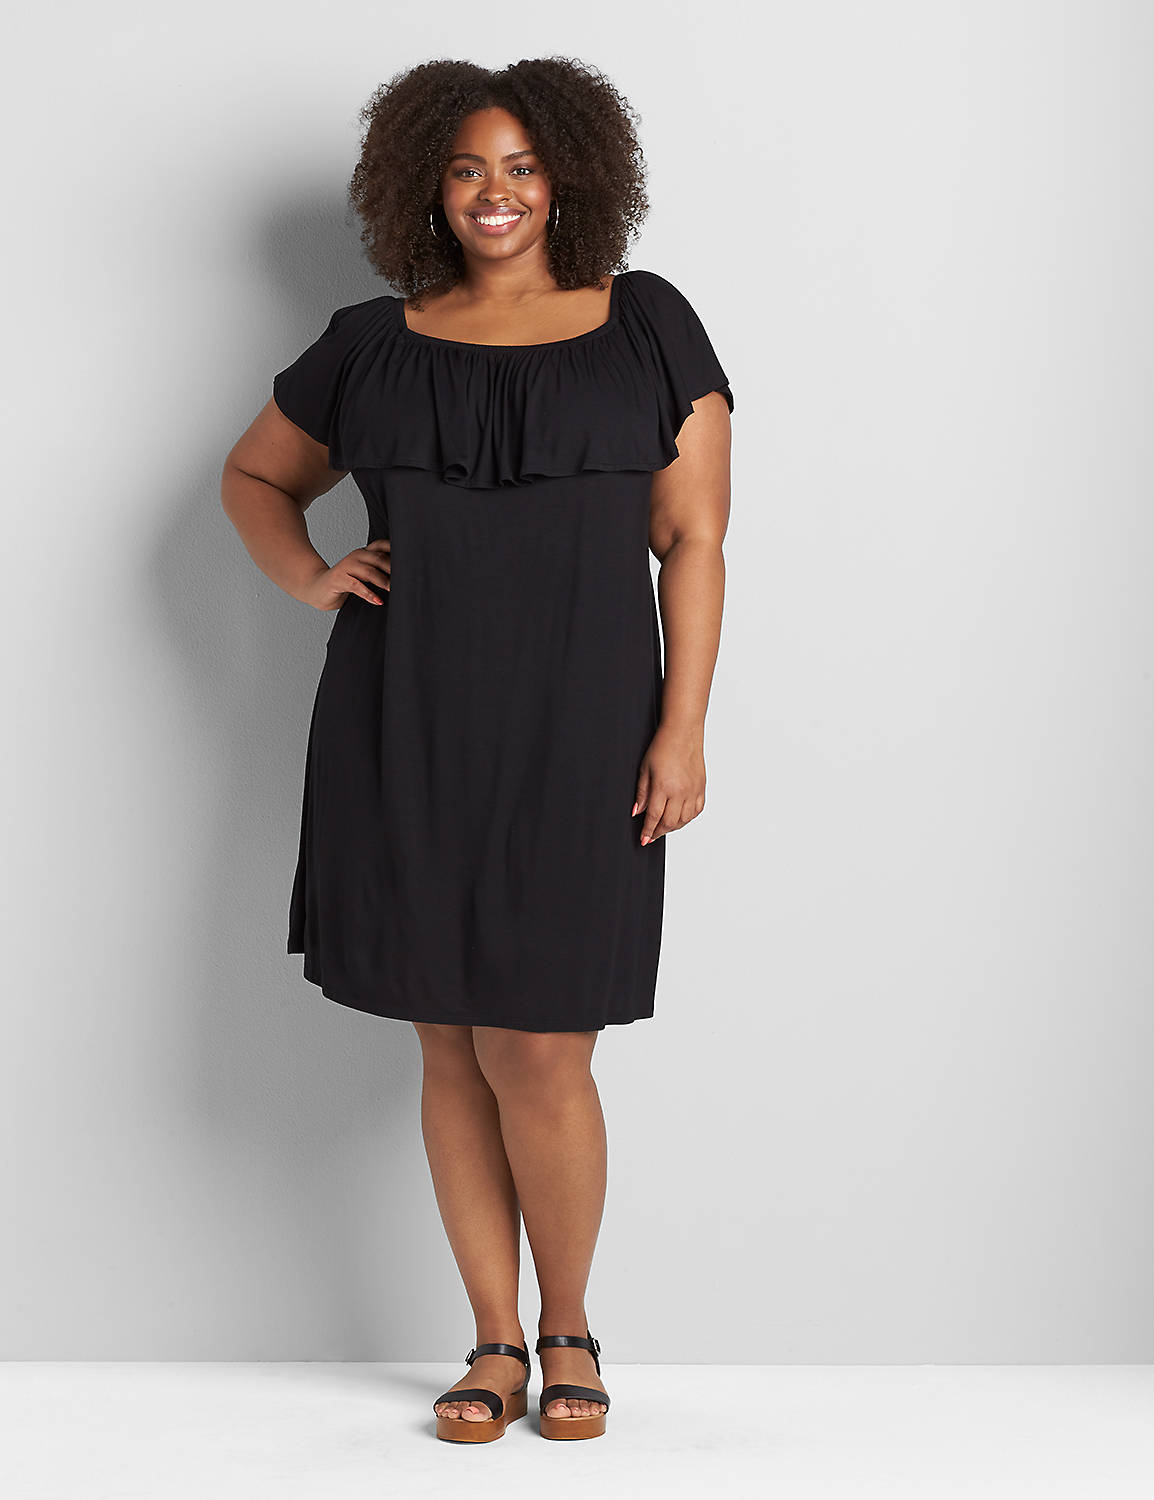 Convertible Off-The-Shoulder A-Line Dress Product Image 3